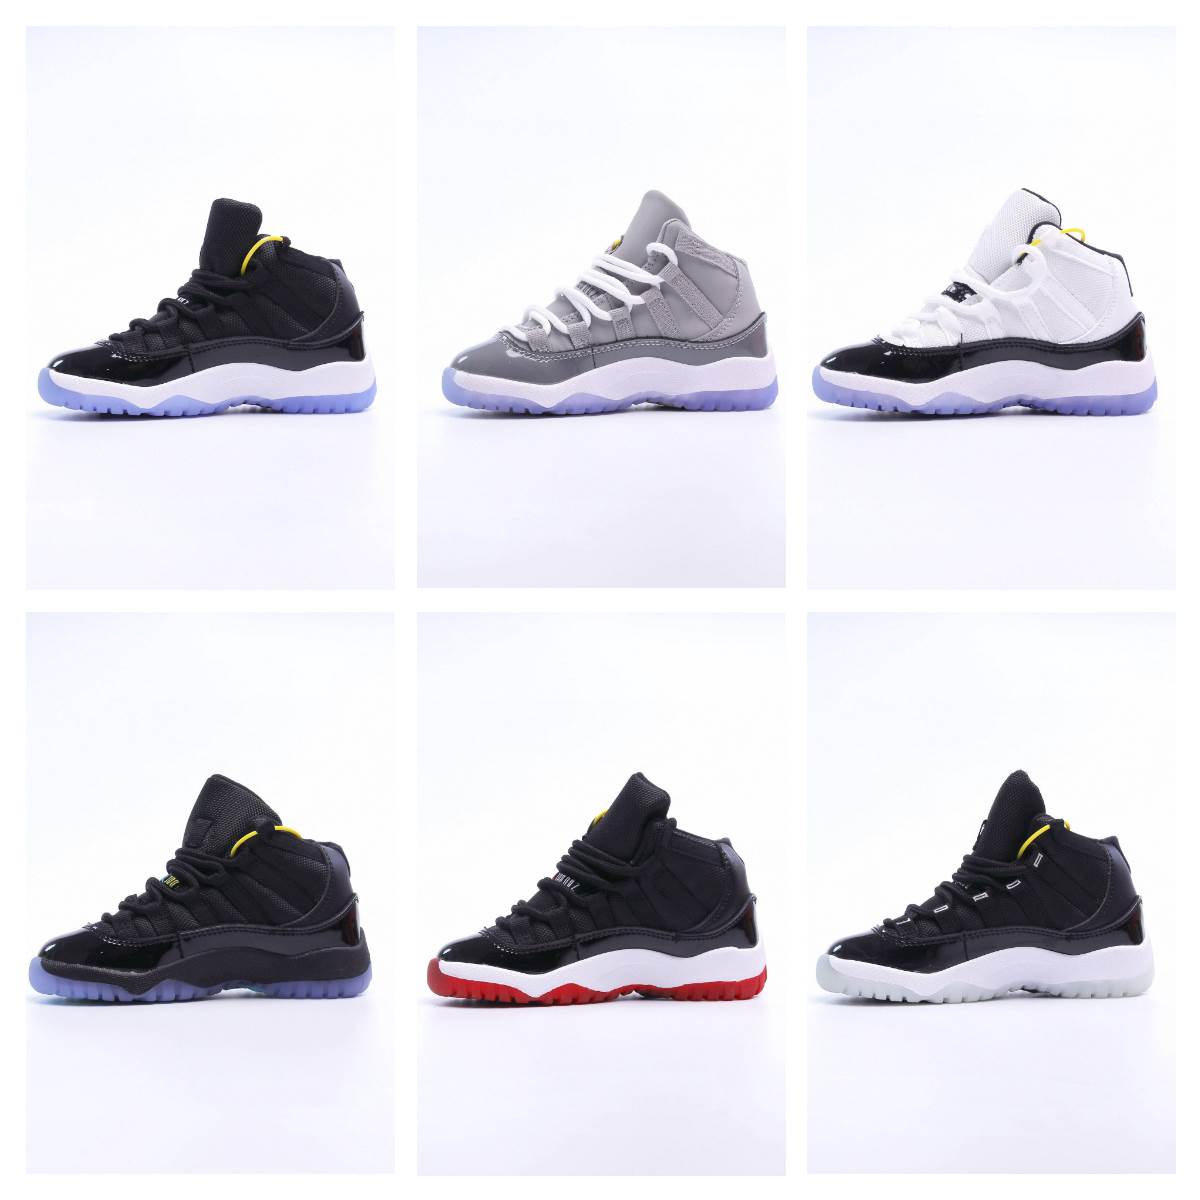 

Infant Bred XI 11S Kids Basketball Shoes Gym Red Children toddler Gamma Blue Concord 11 trainers boy girl tn sneakers Space Jam Child Kids US8c-3y